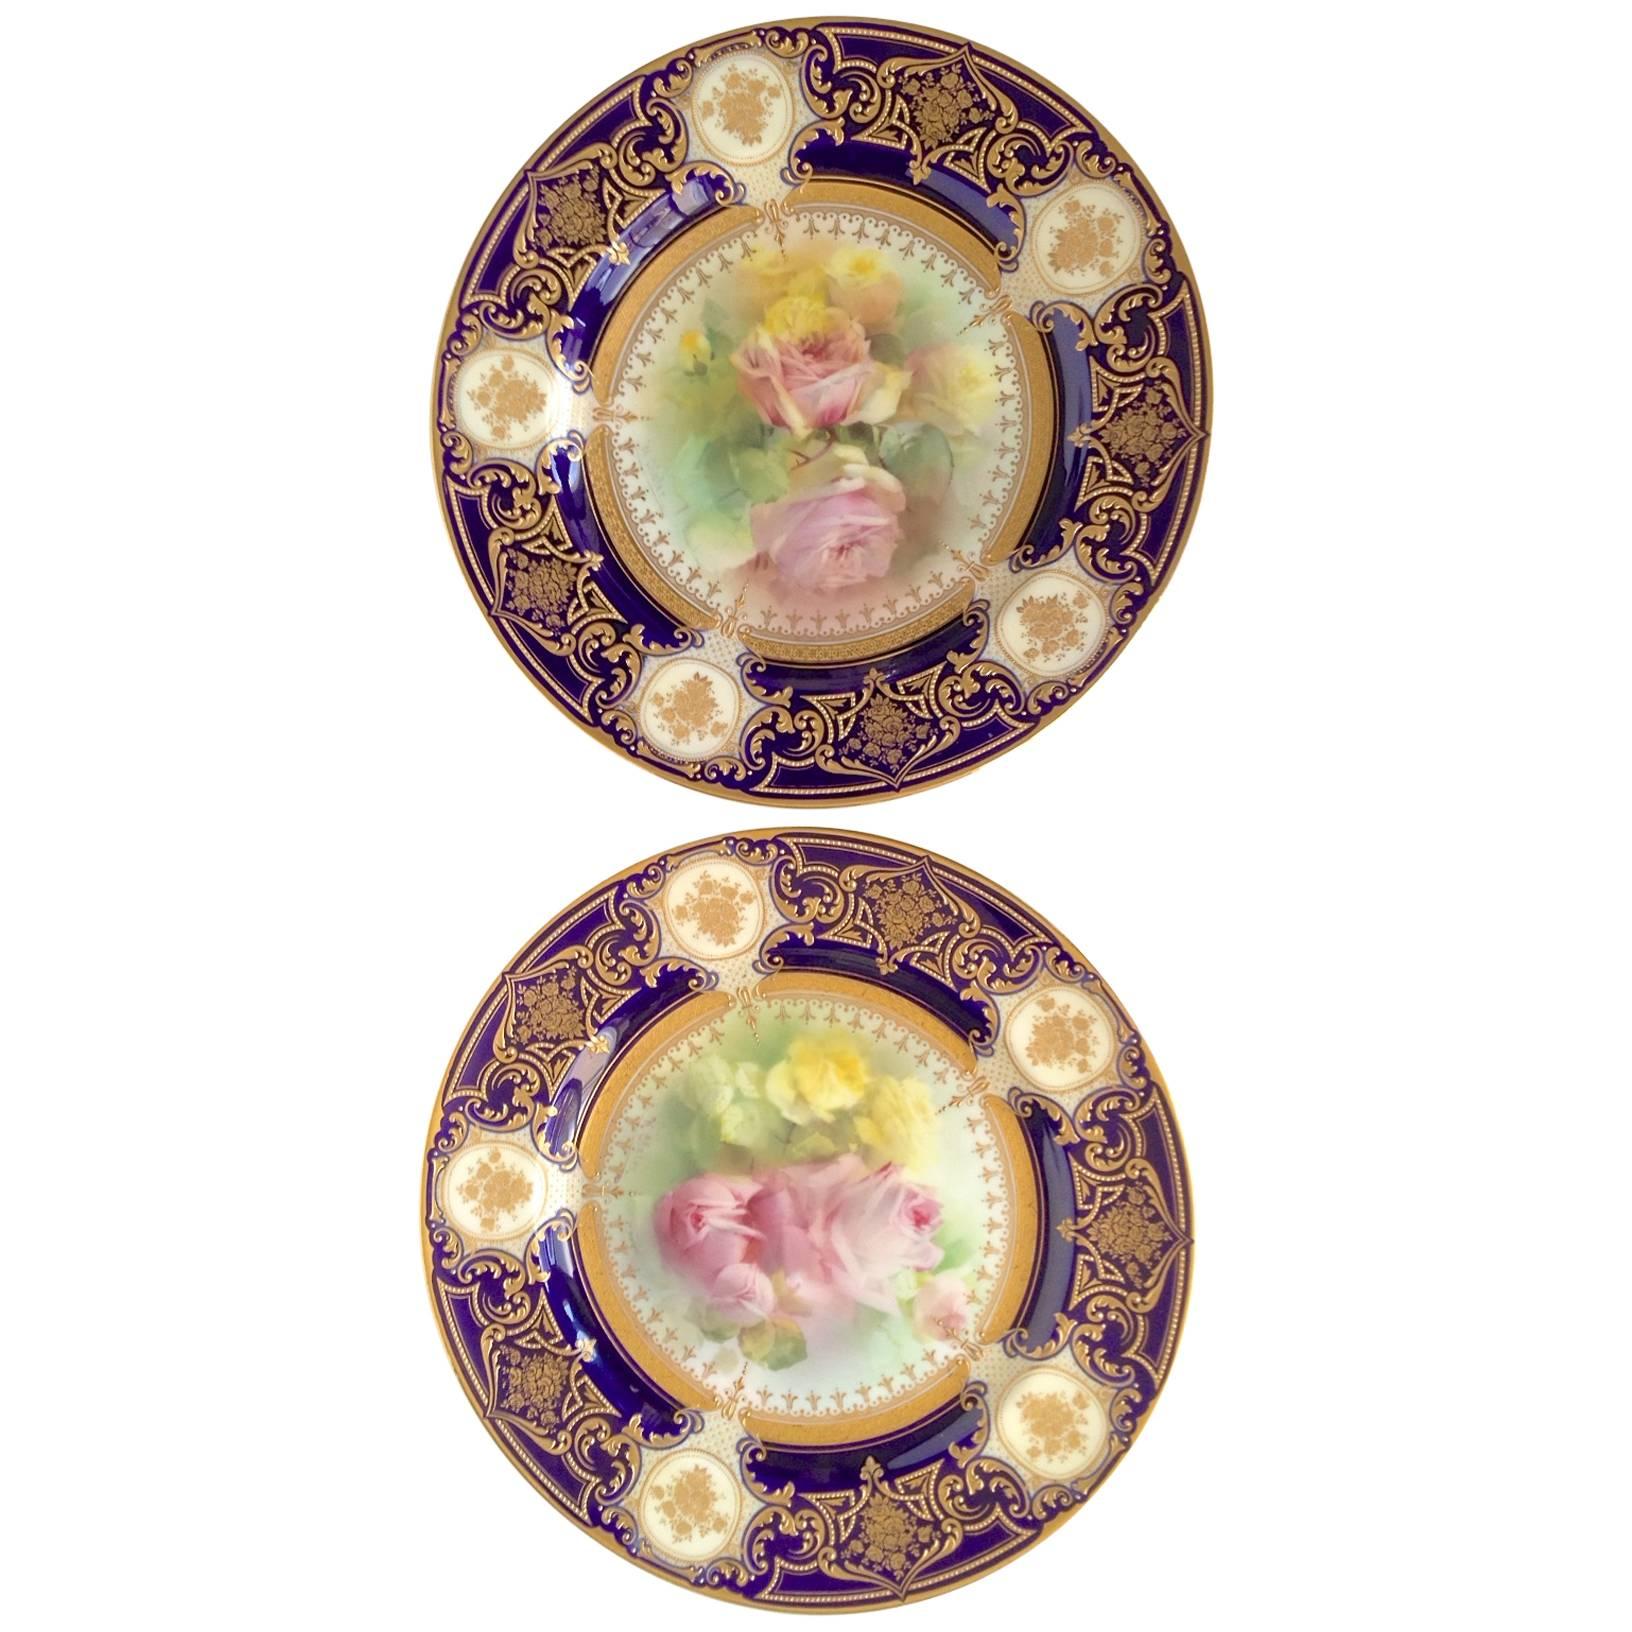 Antique Royal Doulton Rose Plates Signed W. Slater, circa 1920s, Hand-Painted For Sale